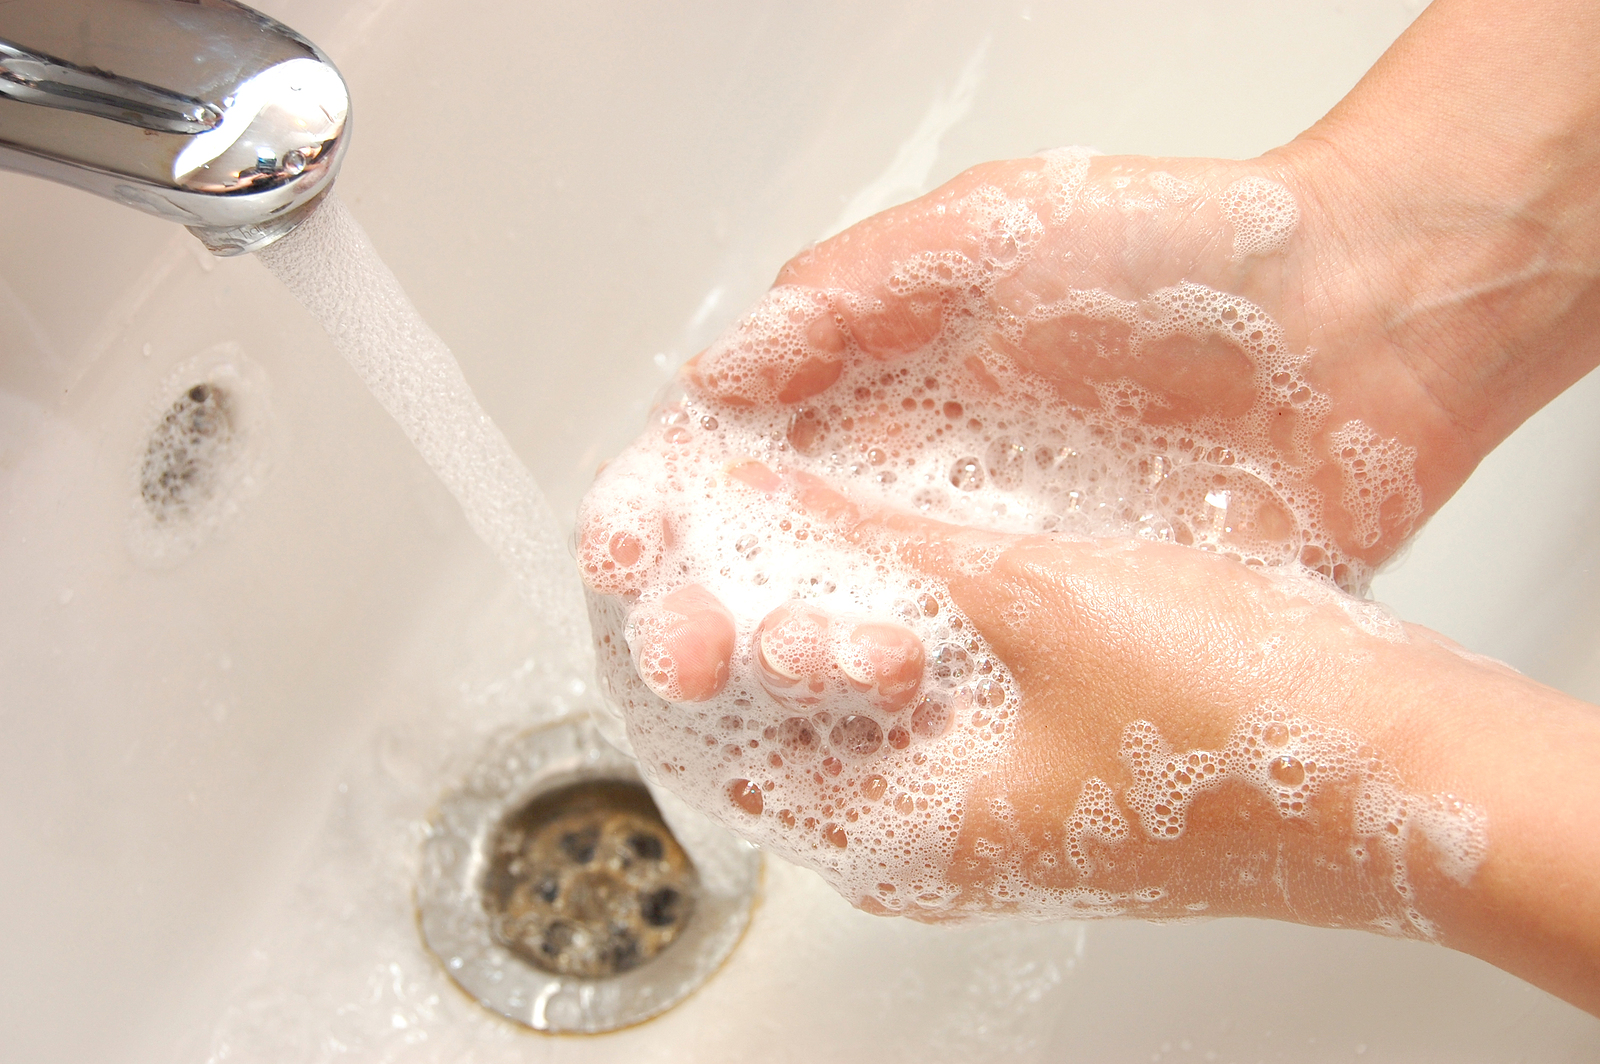 General health care tips on asbestos related diseases: Wash hands